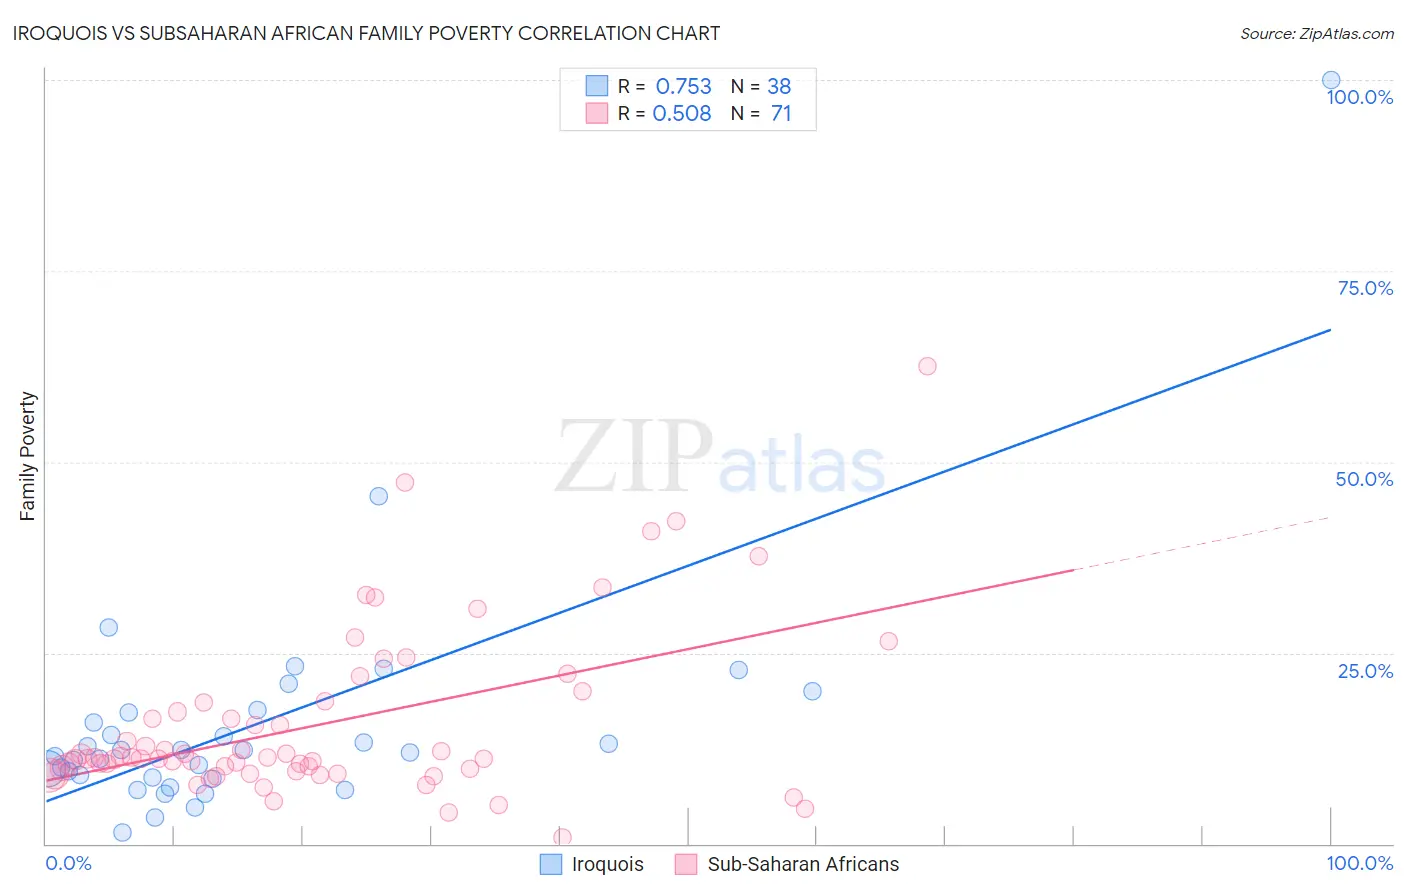 Iroquois vs Subsaharan African Family Poverty